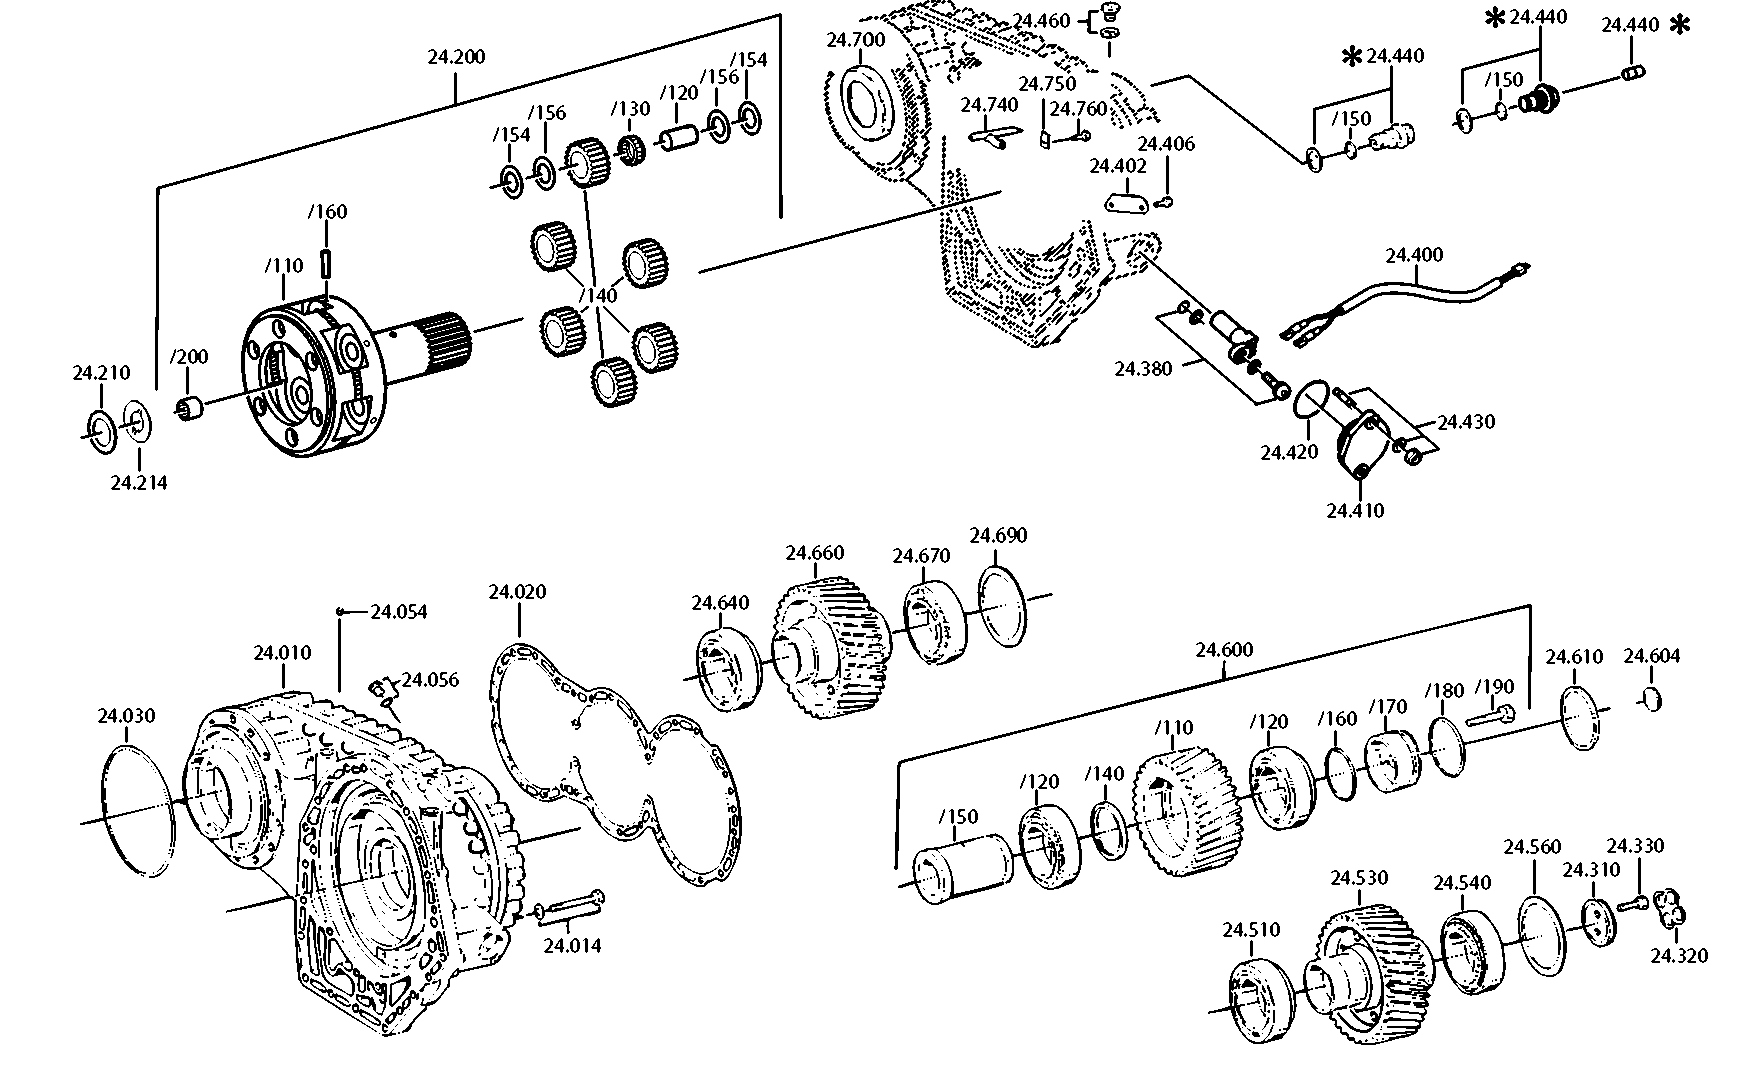 drawing for CNH NEW HOLLAND 81965C1 - TA.ROLLER BEARING (figure 1)